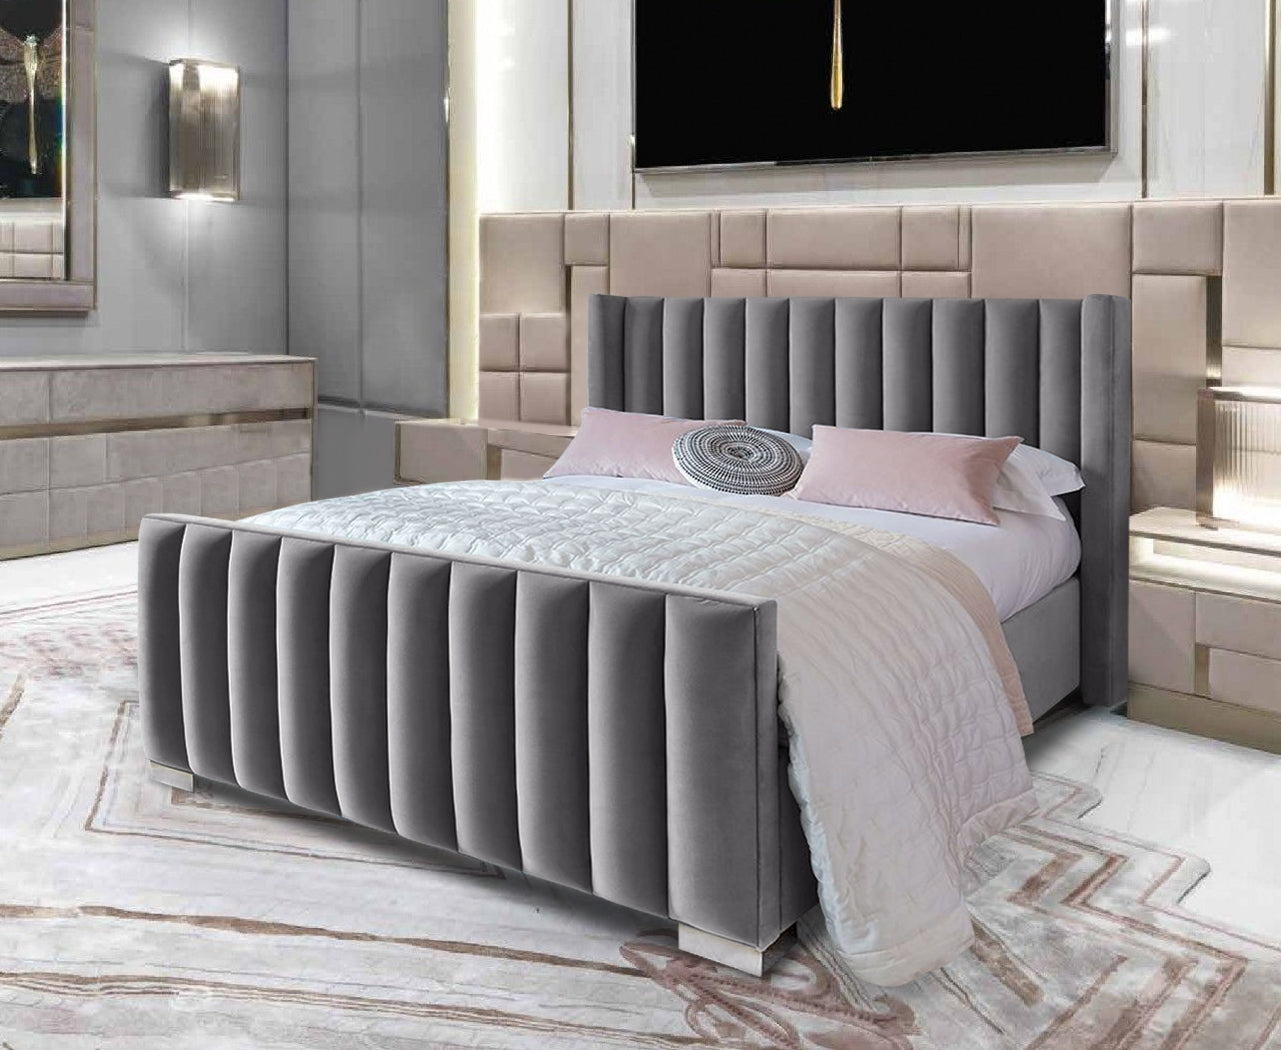 The Bespoke Pia Bed- Fully Customisable with Storage Options